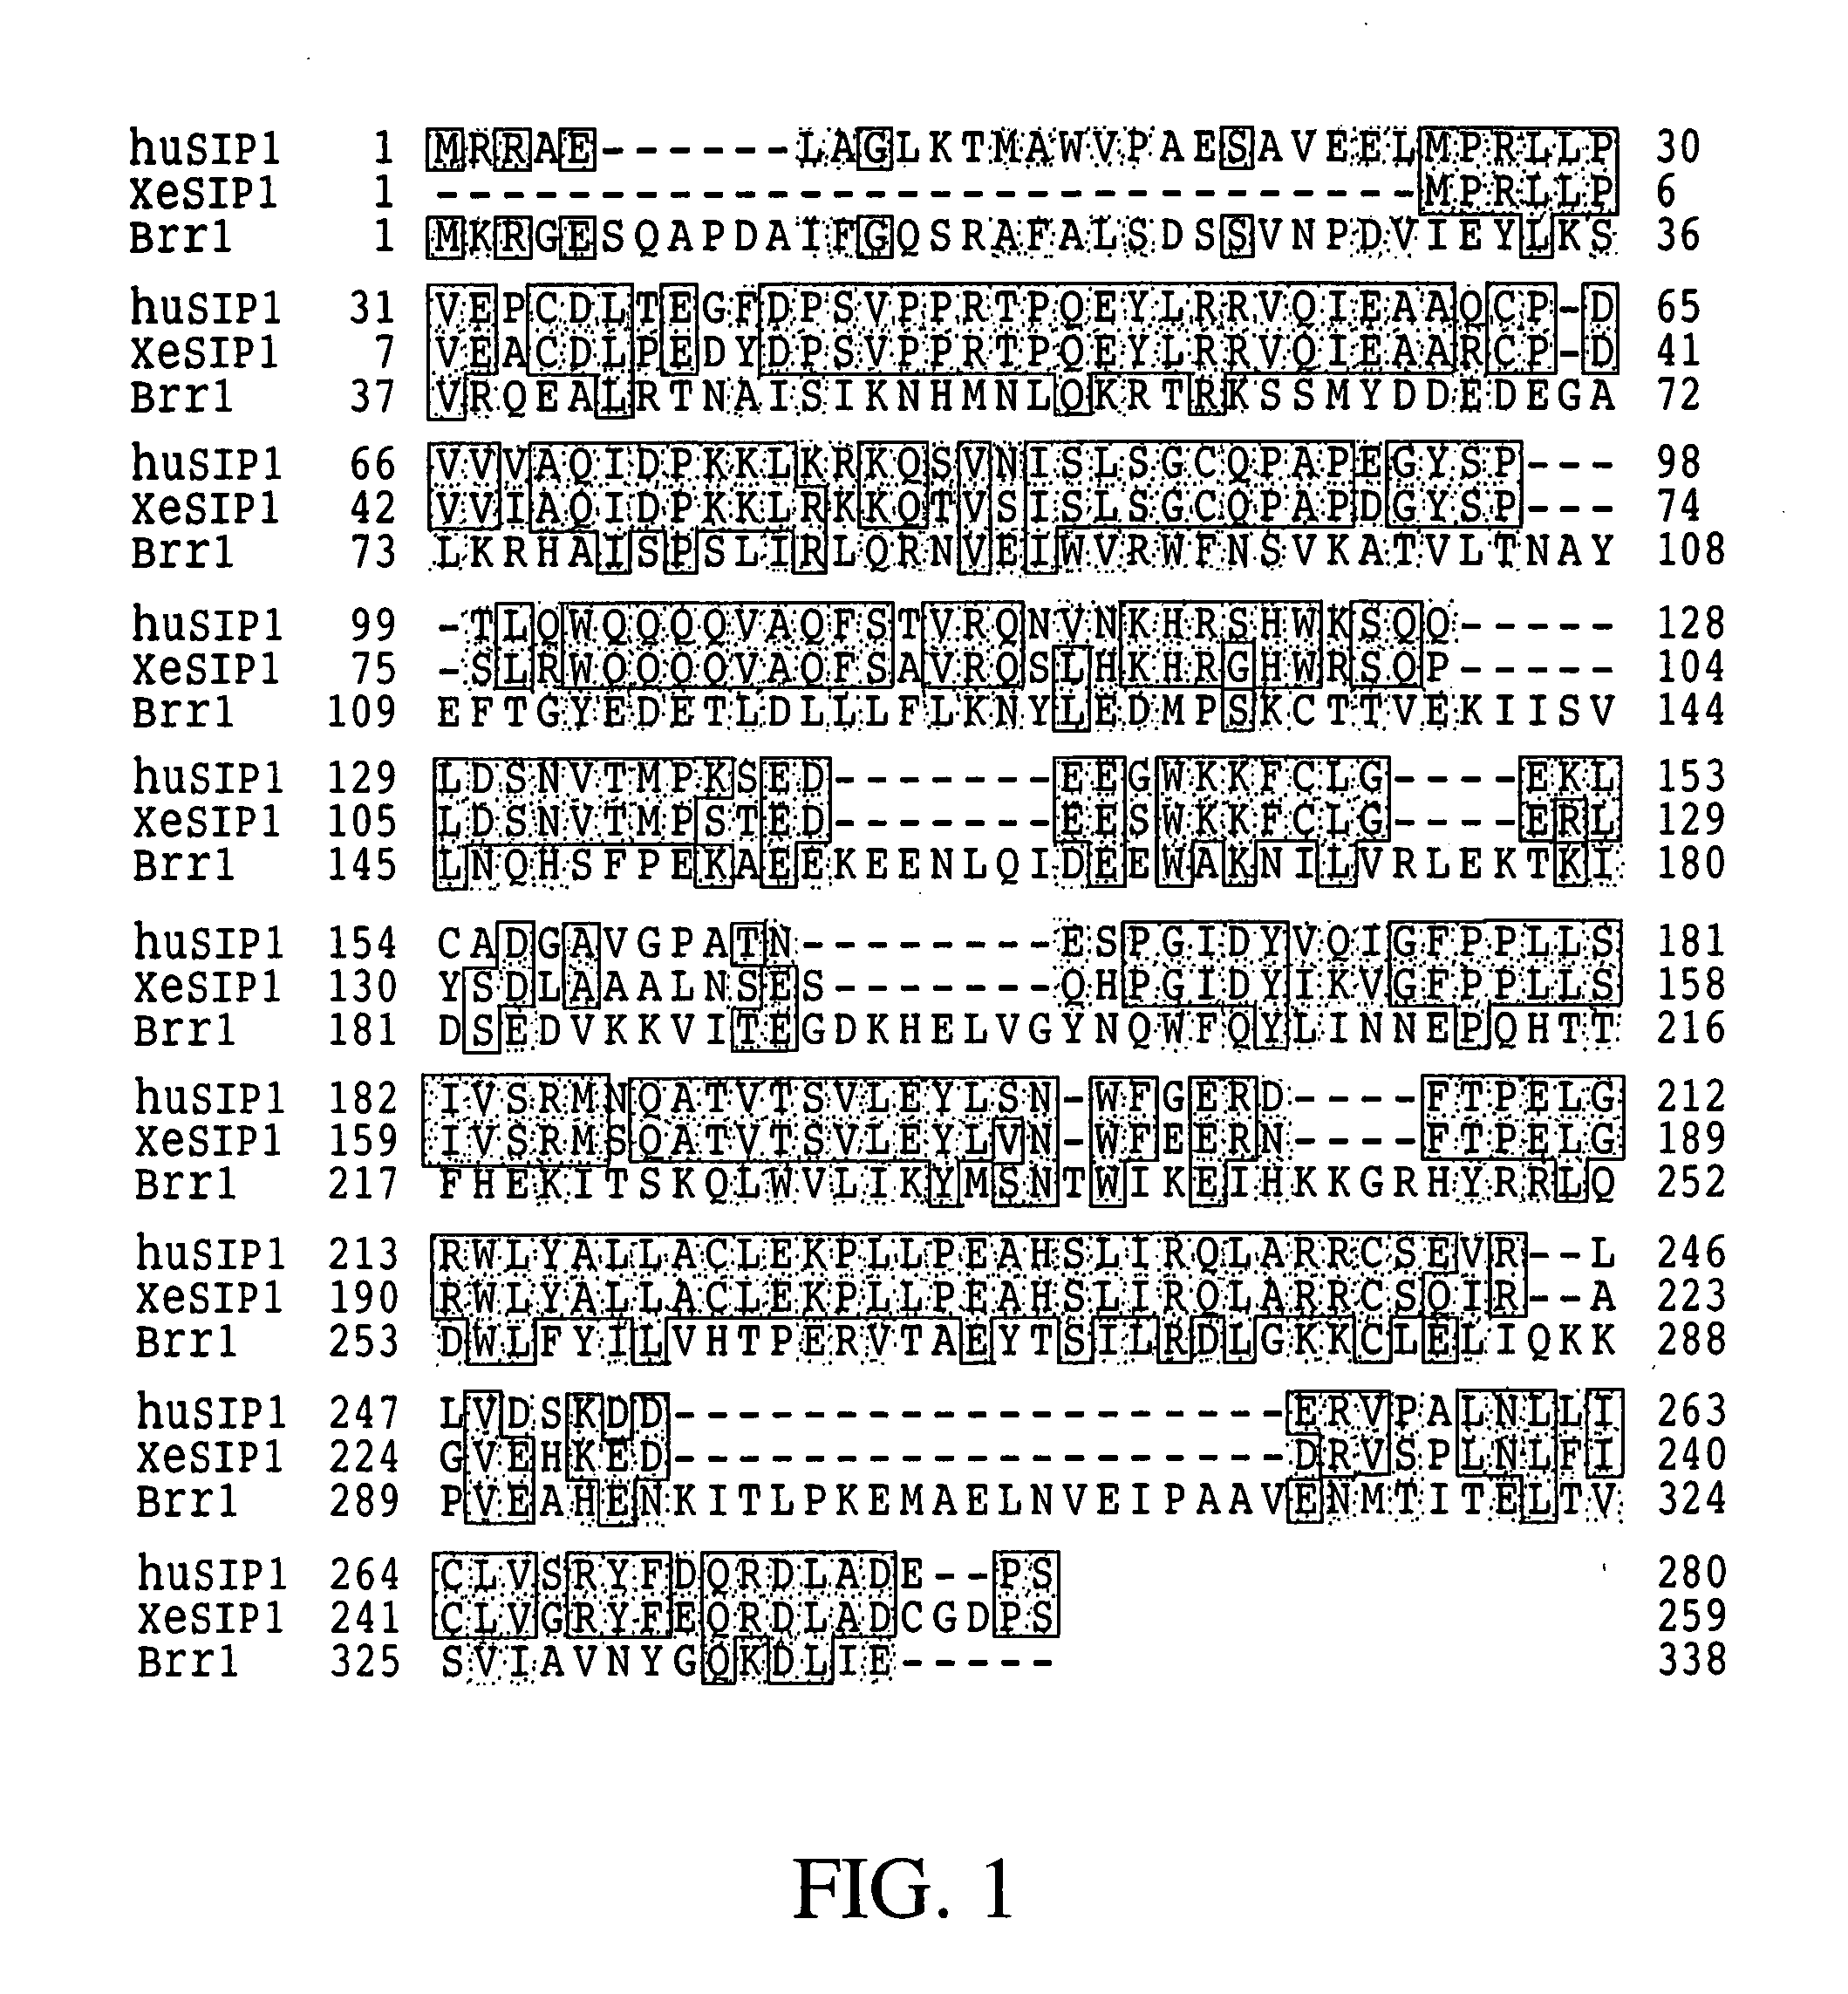 Compositions, methods, and kits useful for the diagnosis and treatment of spinal muscular atrophy